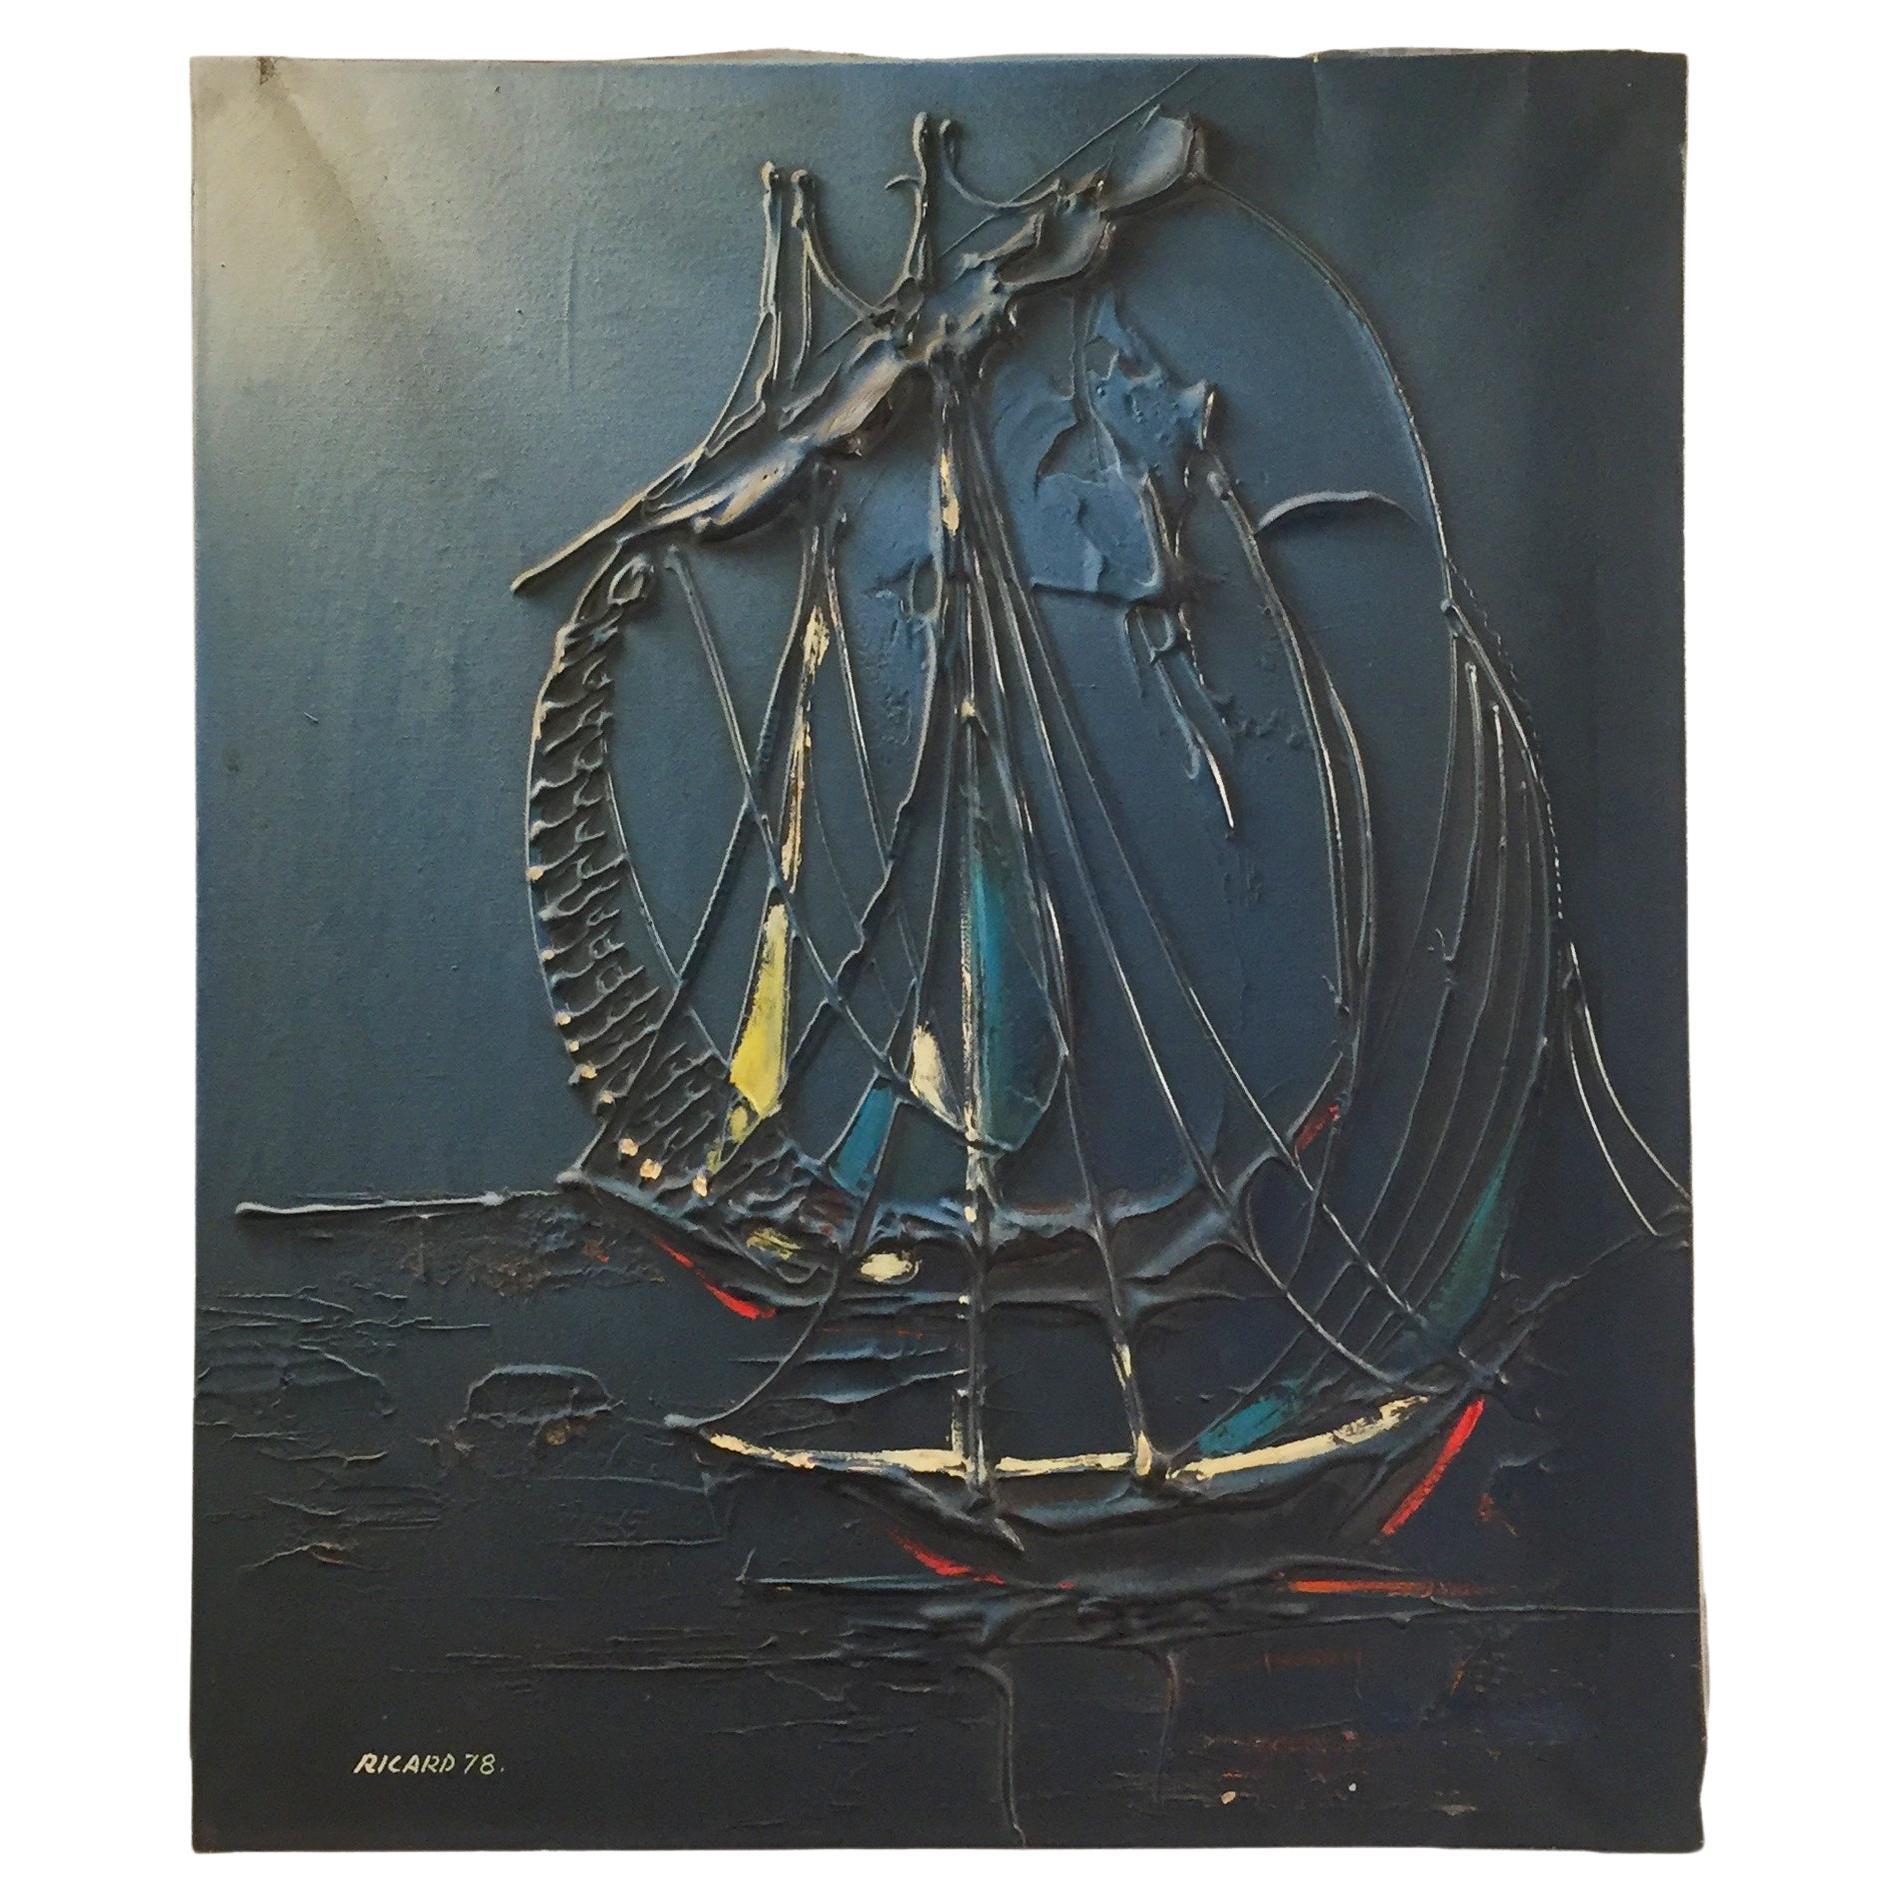 1970s Vintage "Ricard '78" Nautical Oil on Canvas Wall Modern Painting Sea Ship For Sale